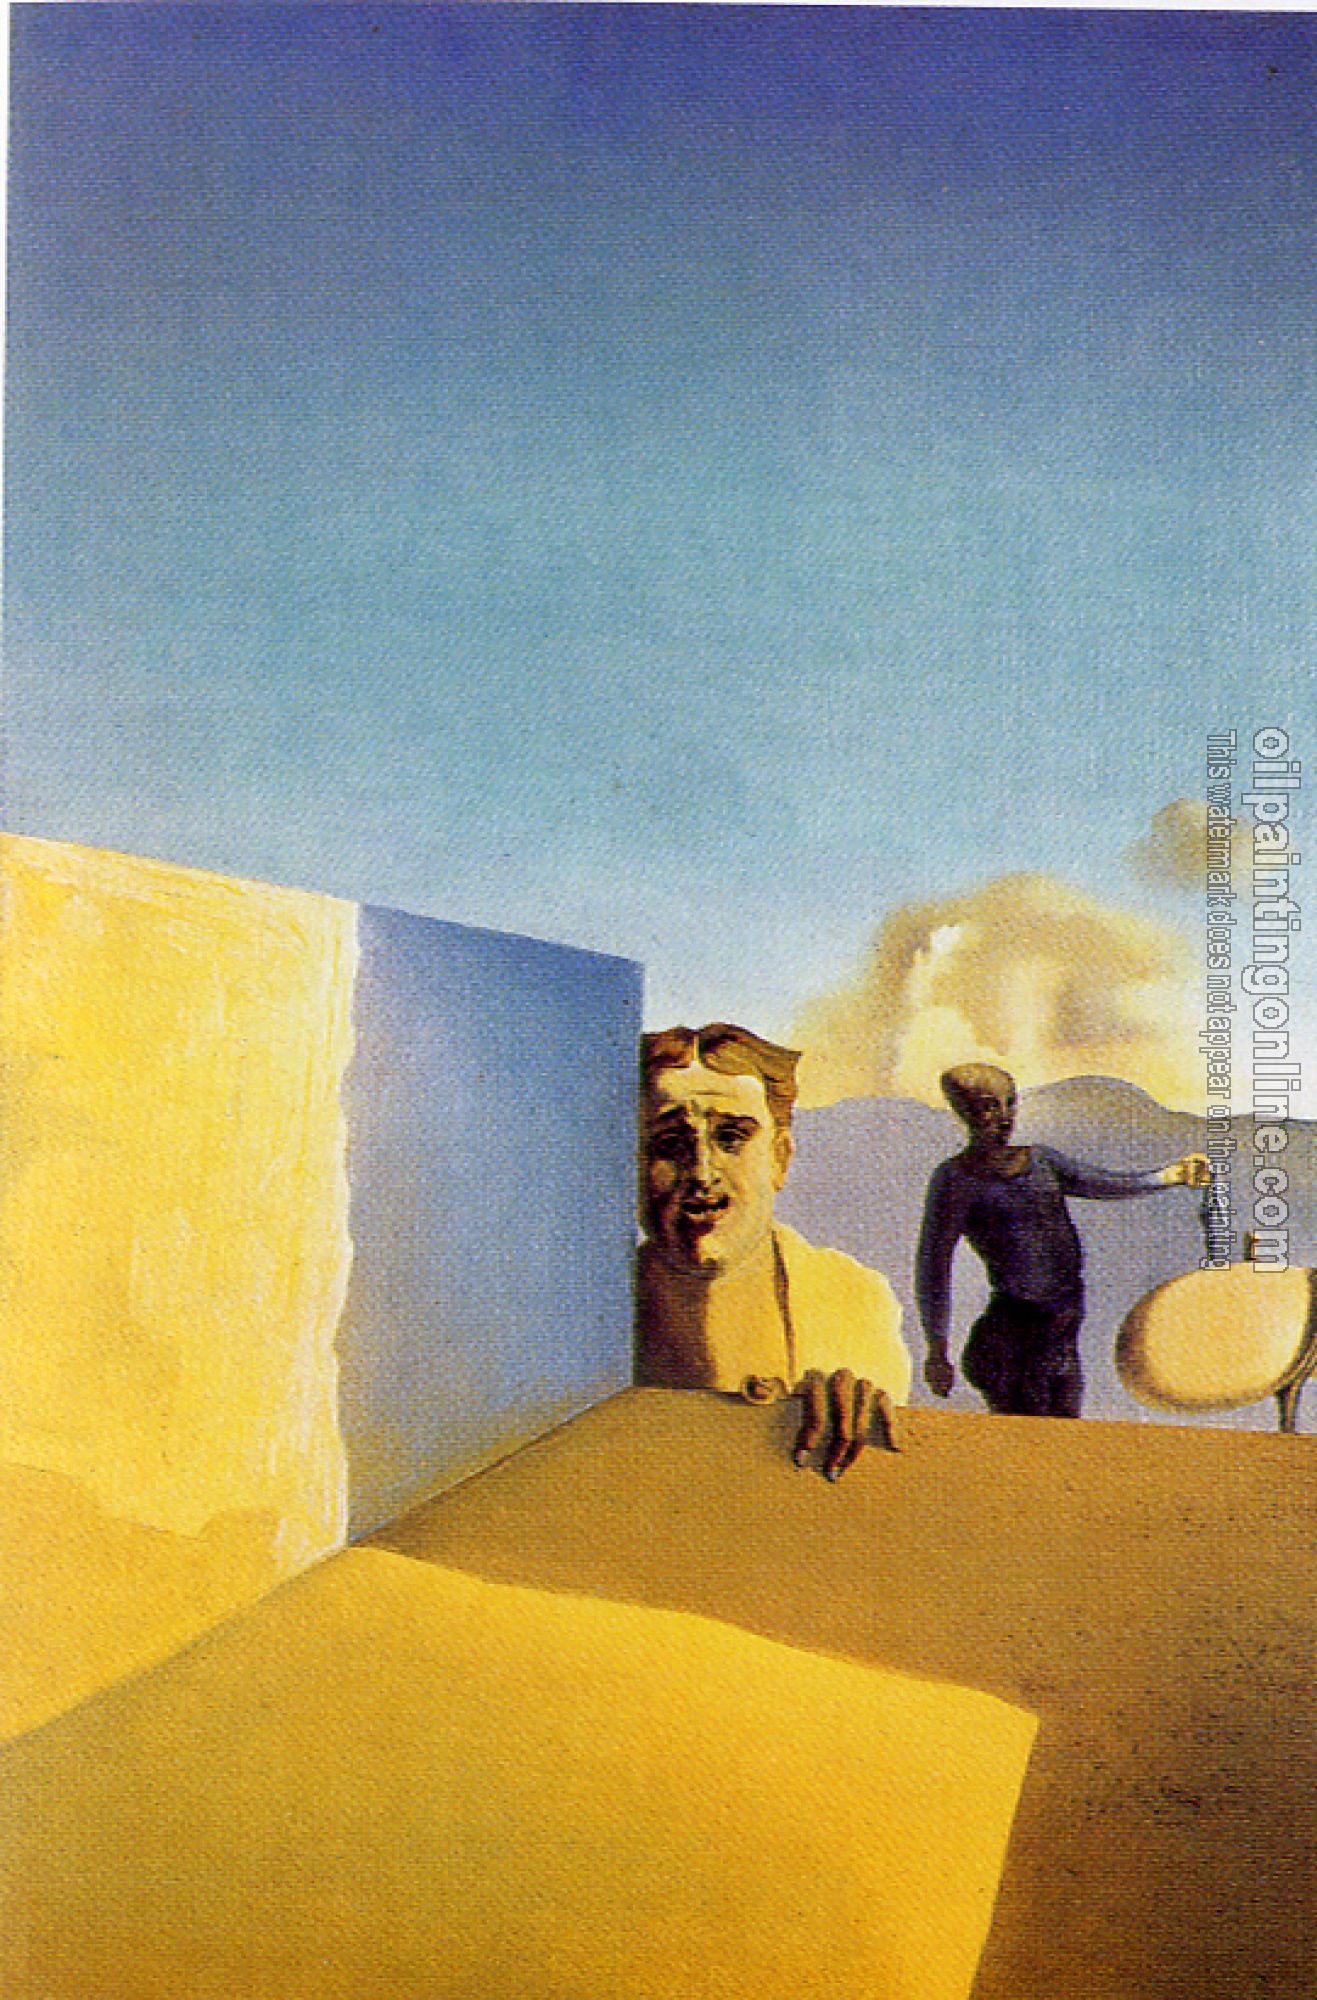 Dali, Salvador - Barber Saddened by the Persistence of Good Weather (The Anguished Barber)